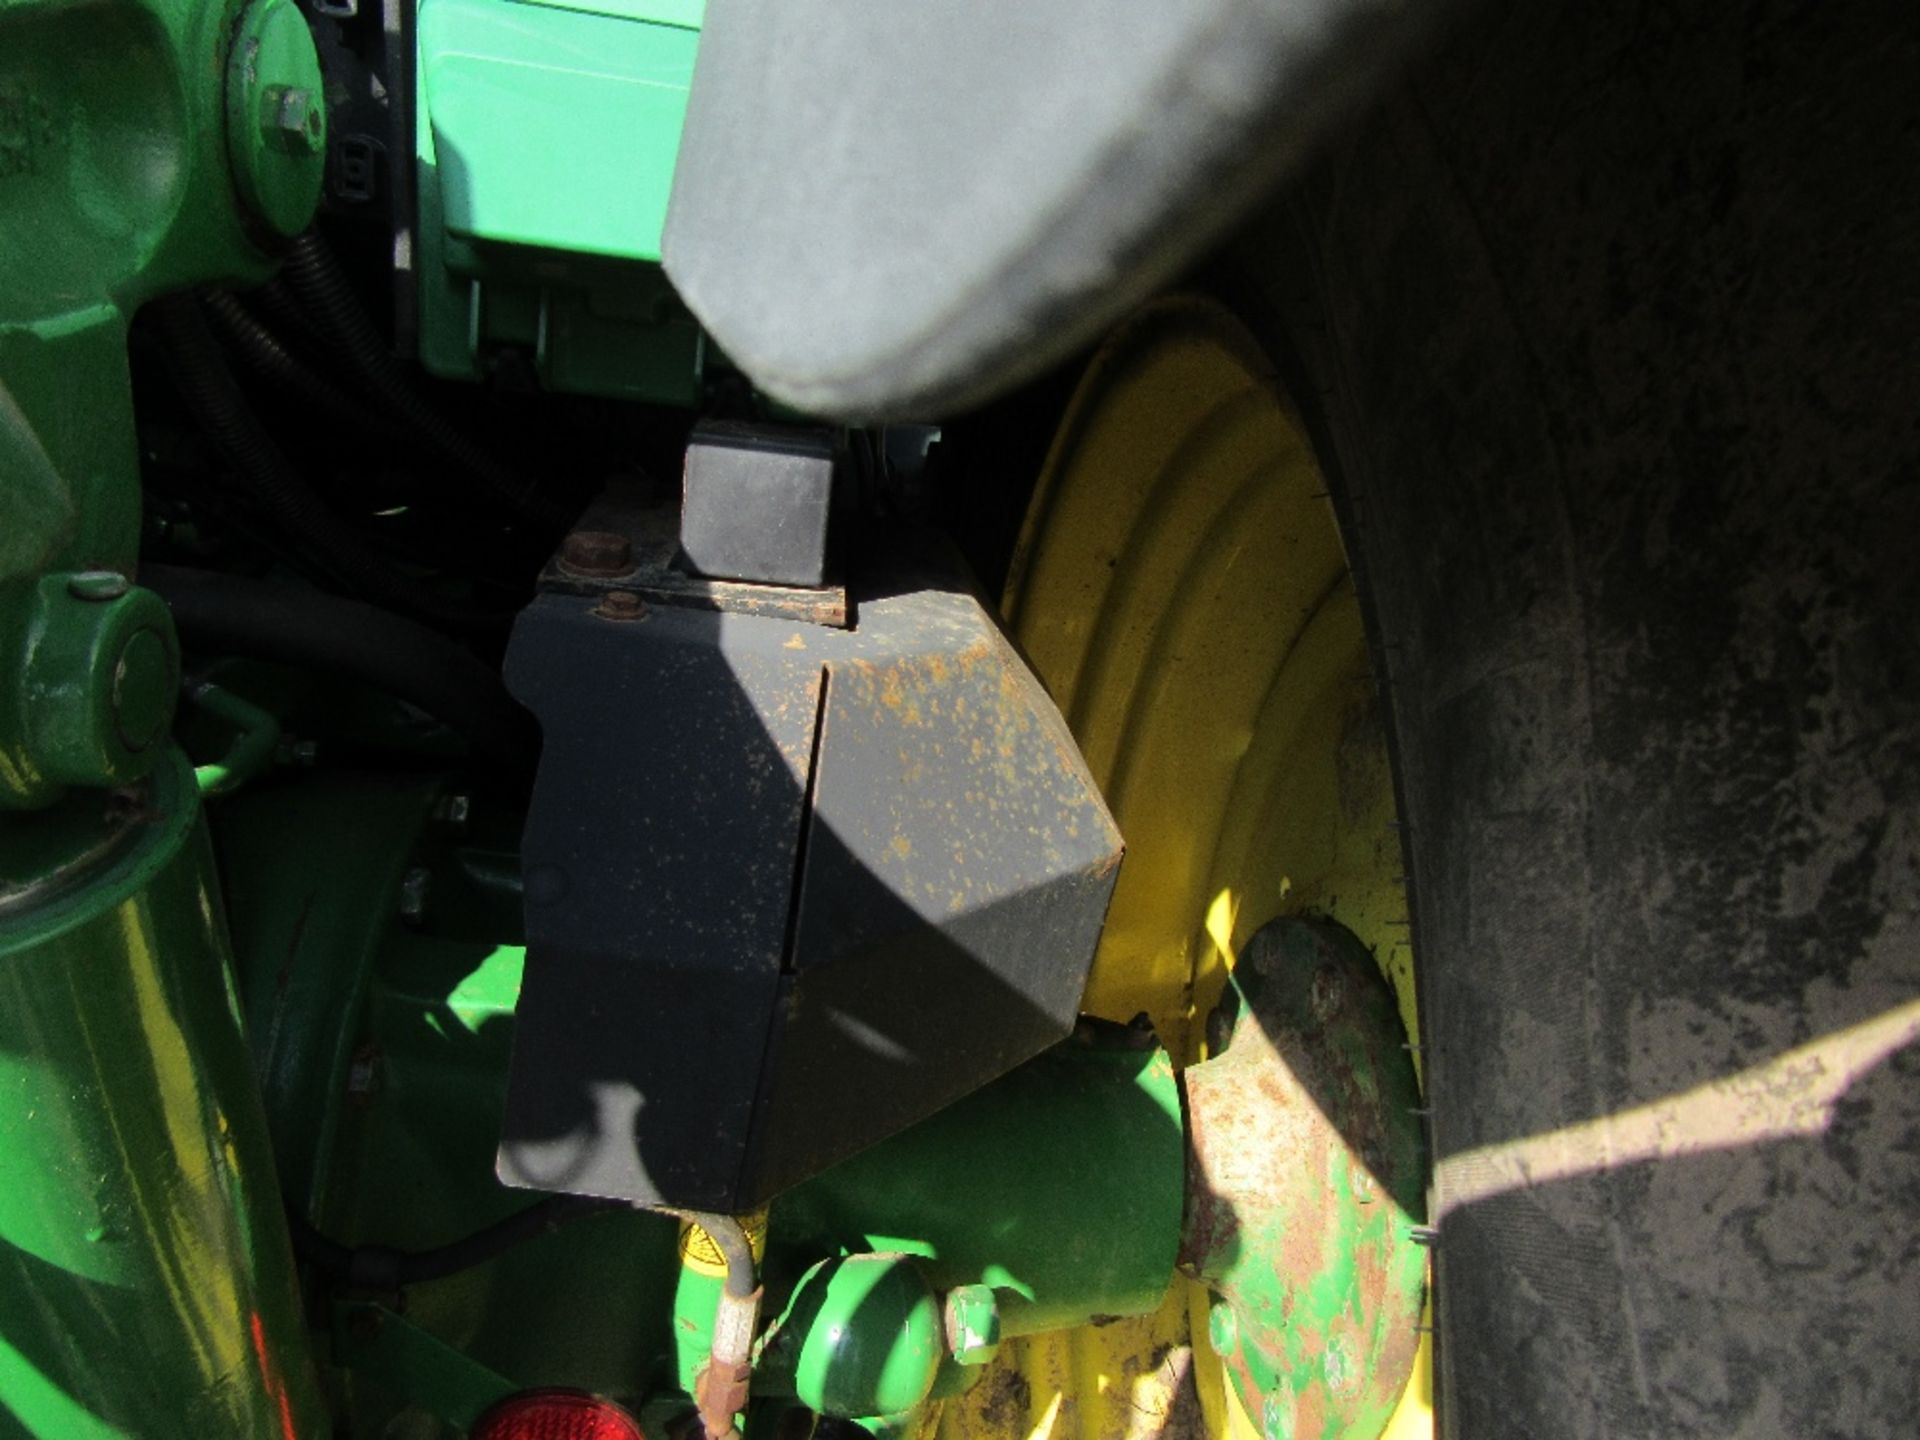 John Deere 6920 4wd Tractor with TLS Front Suspension, Cab Suspension & Air Brakes Reg No DK55 NHZ - Image 7 of 14